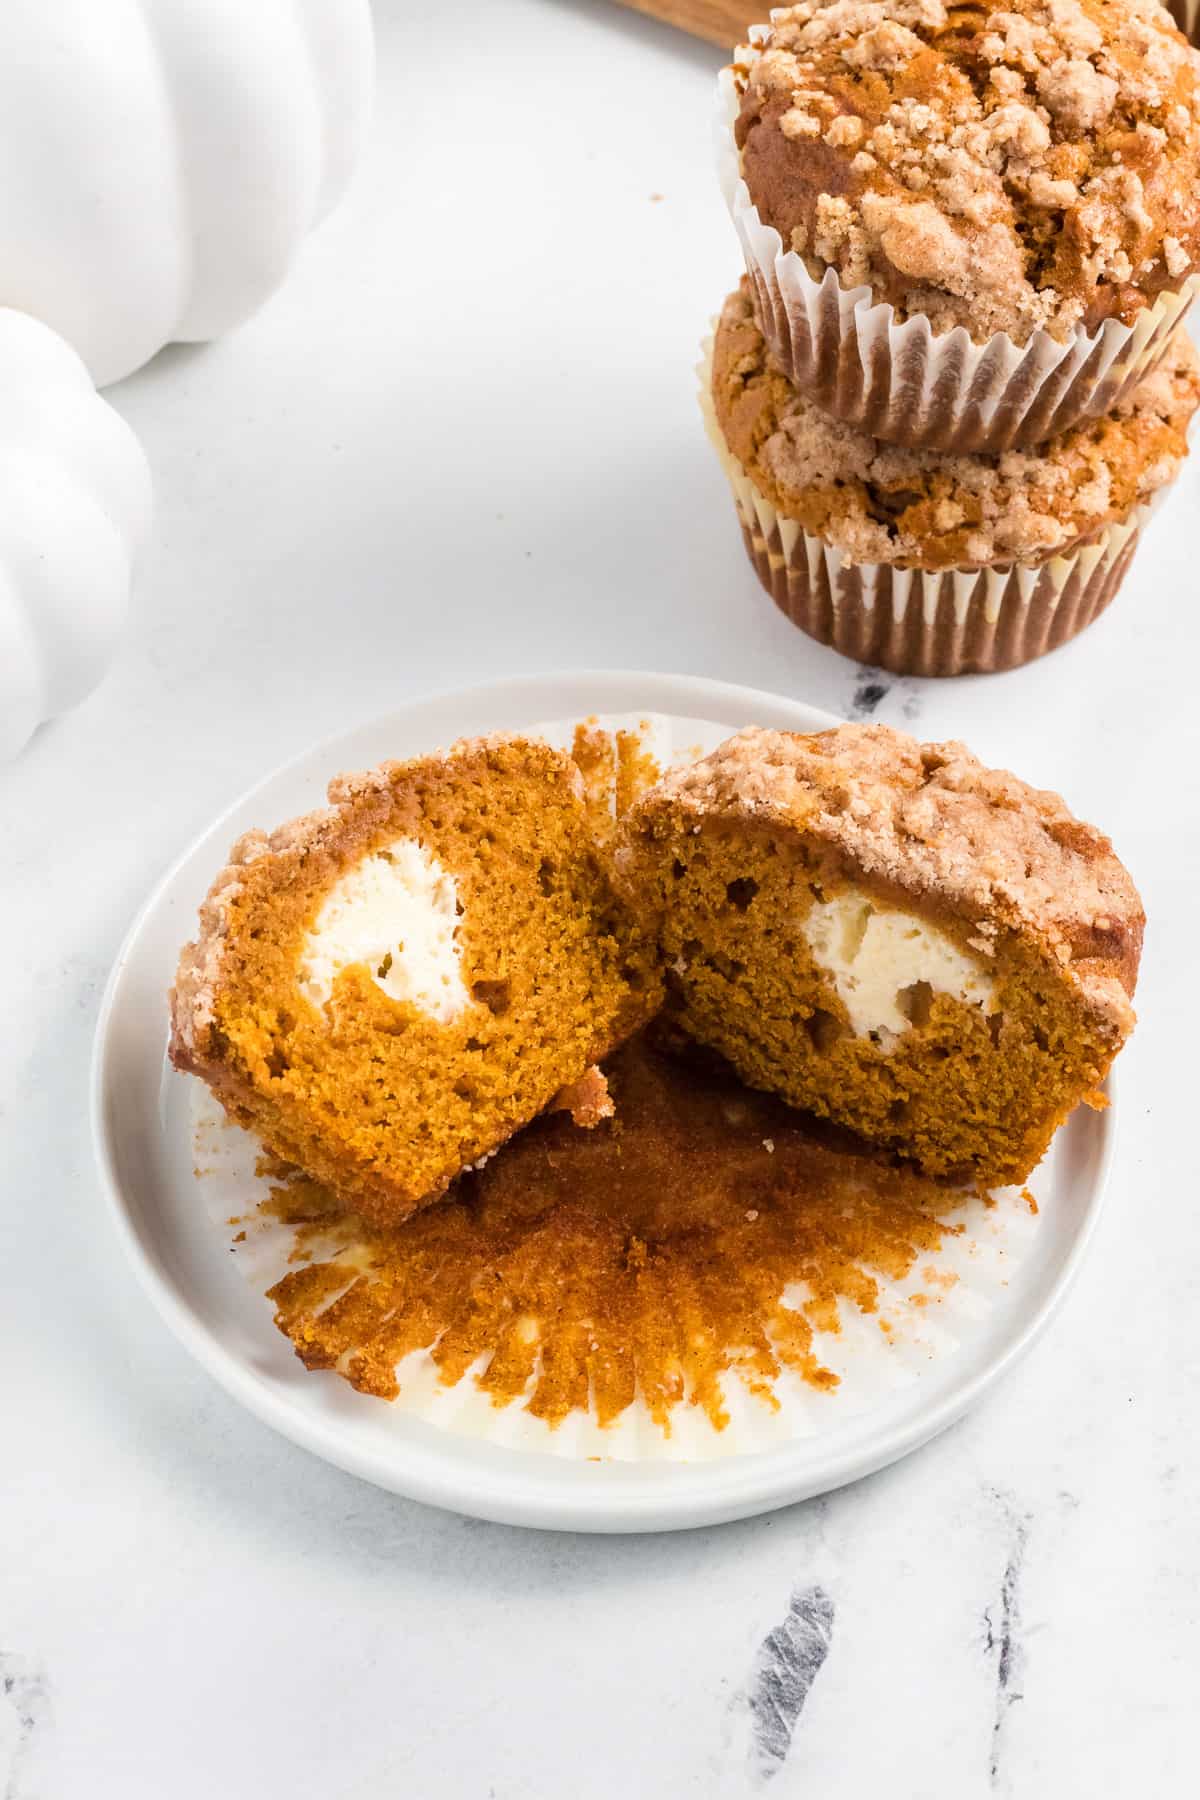 a pumpkin muffin filled with a cream cheese center sliced in half on a plate.